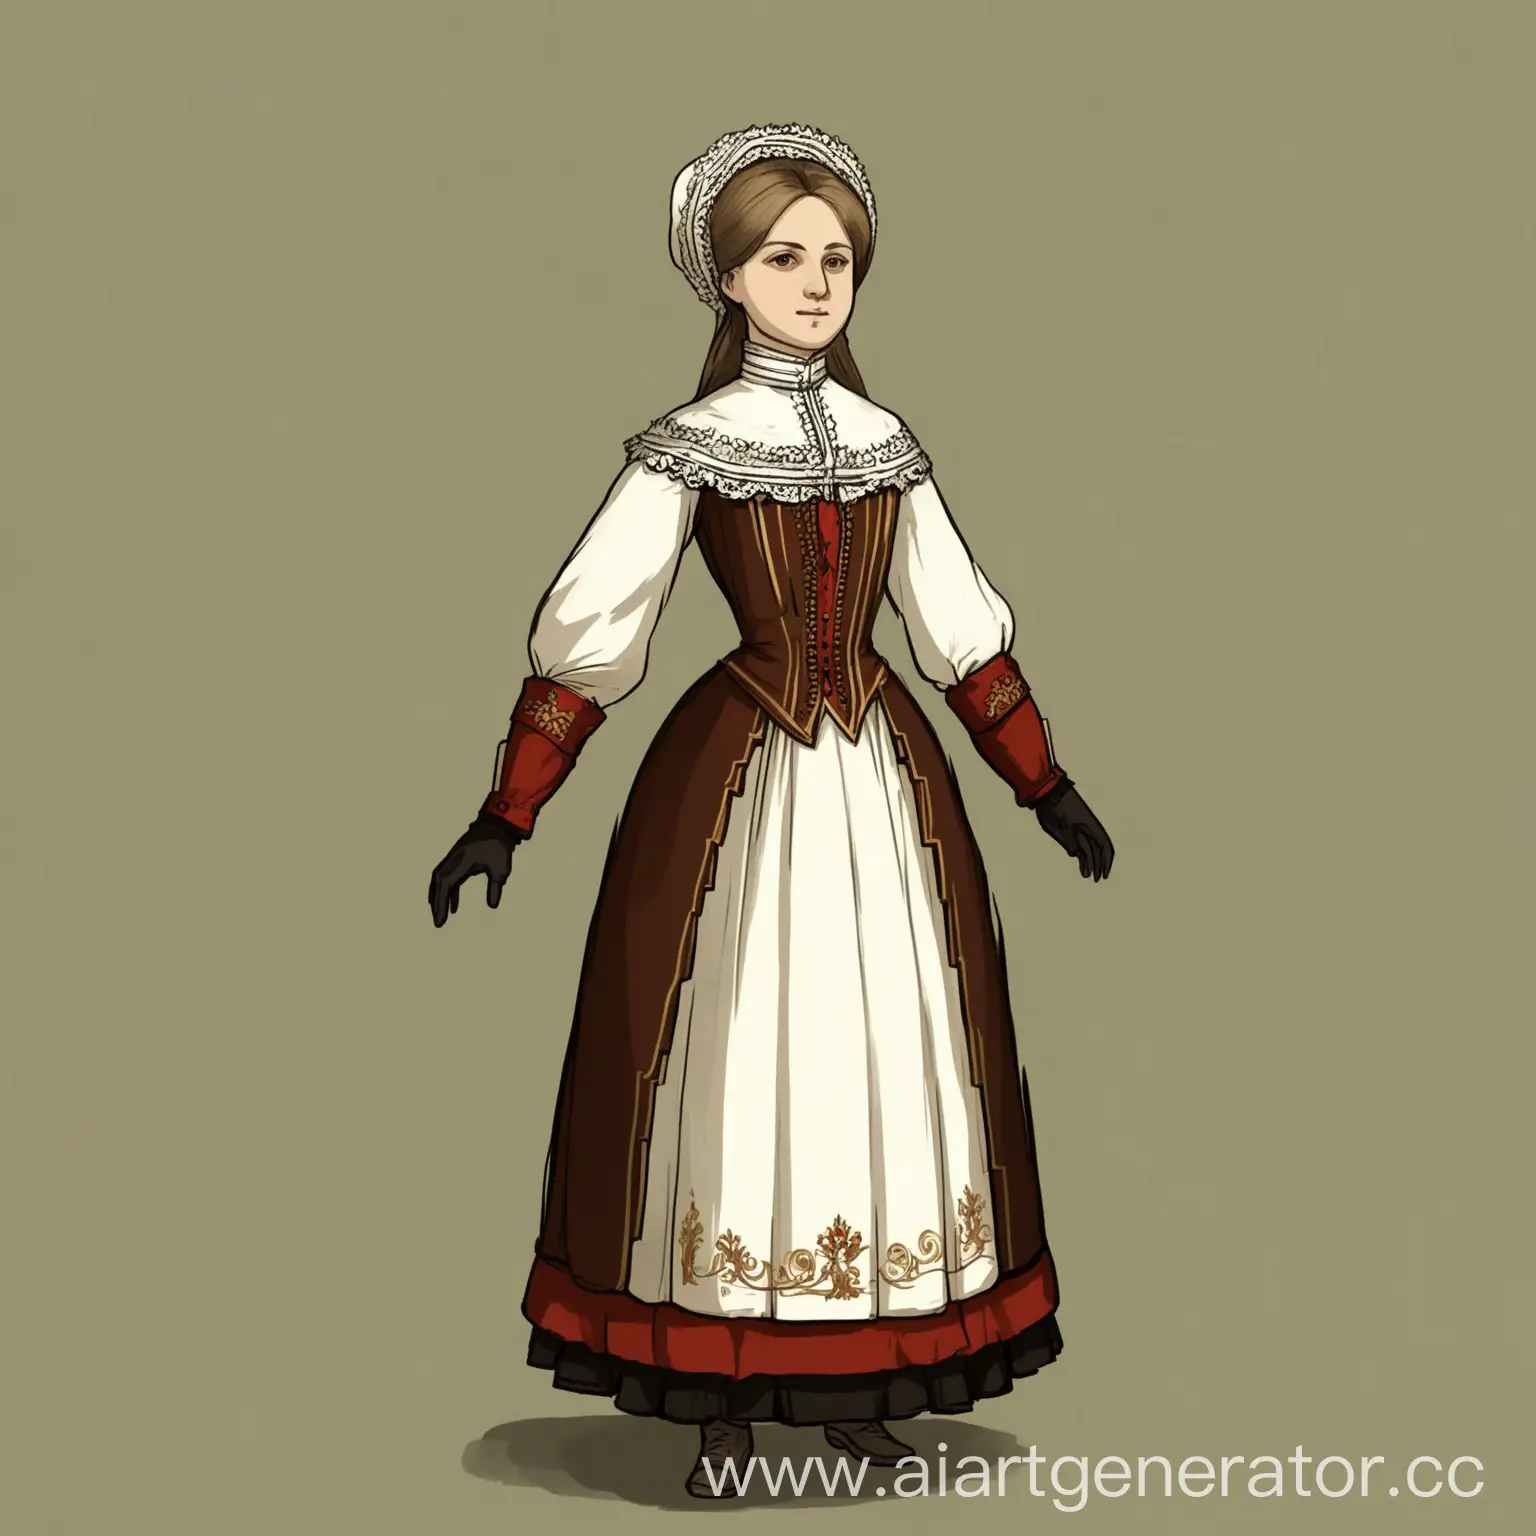 come up with the concept of a game character from the 19th century of Russia